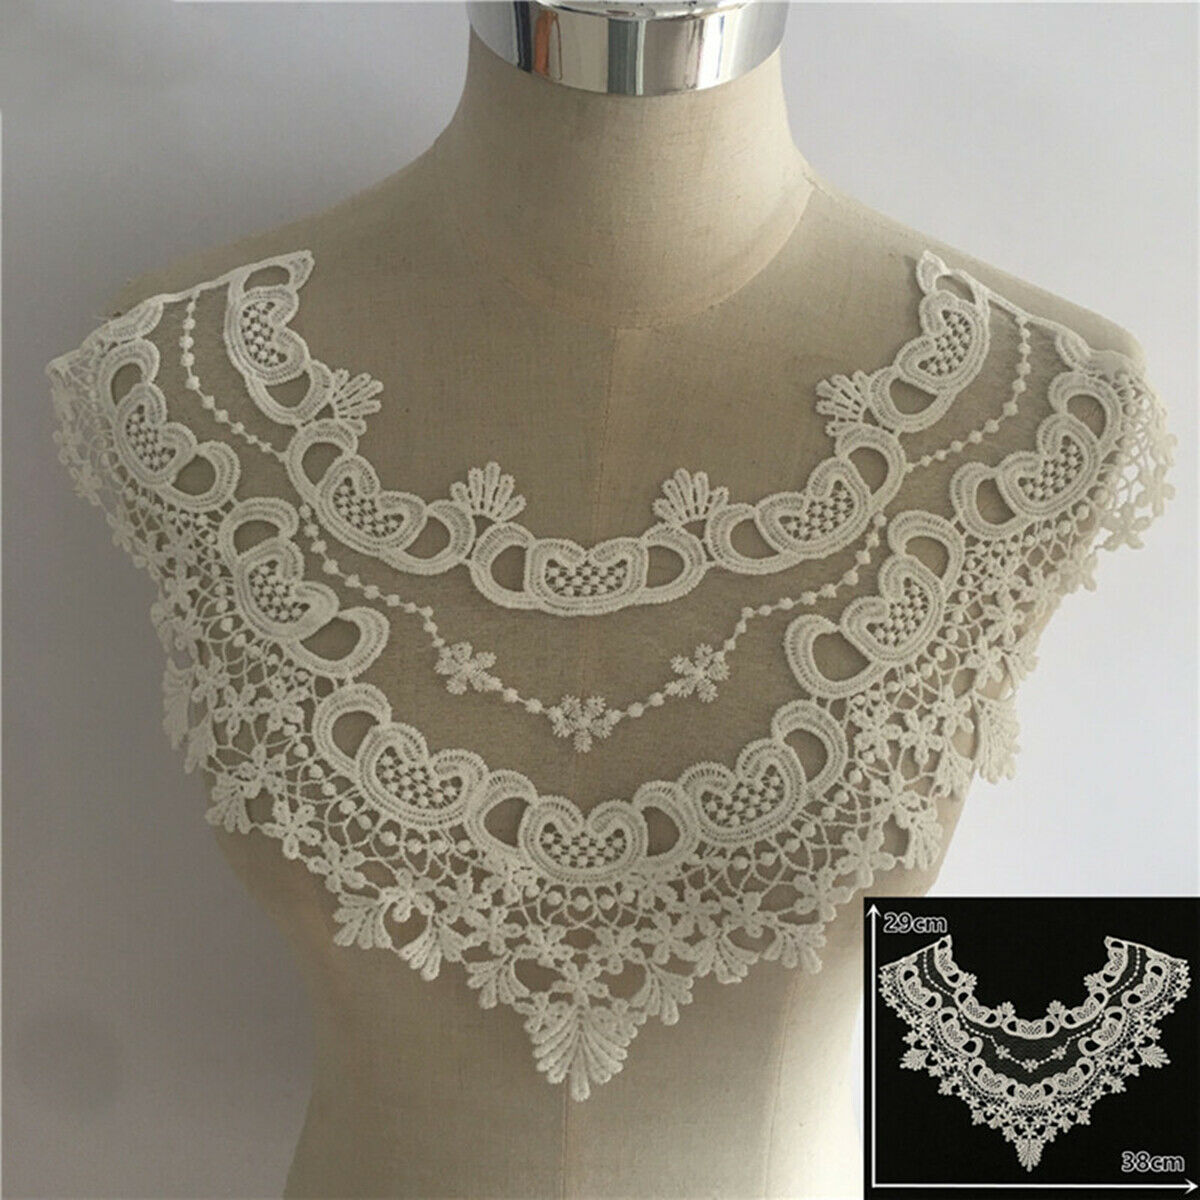 Embroidered Flower Collar Applique Lace Trim Neckline Sewing Patch Fabric DIY